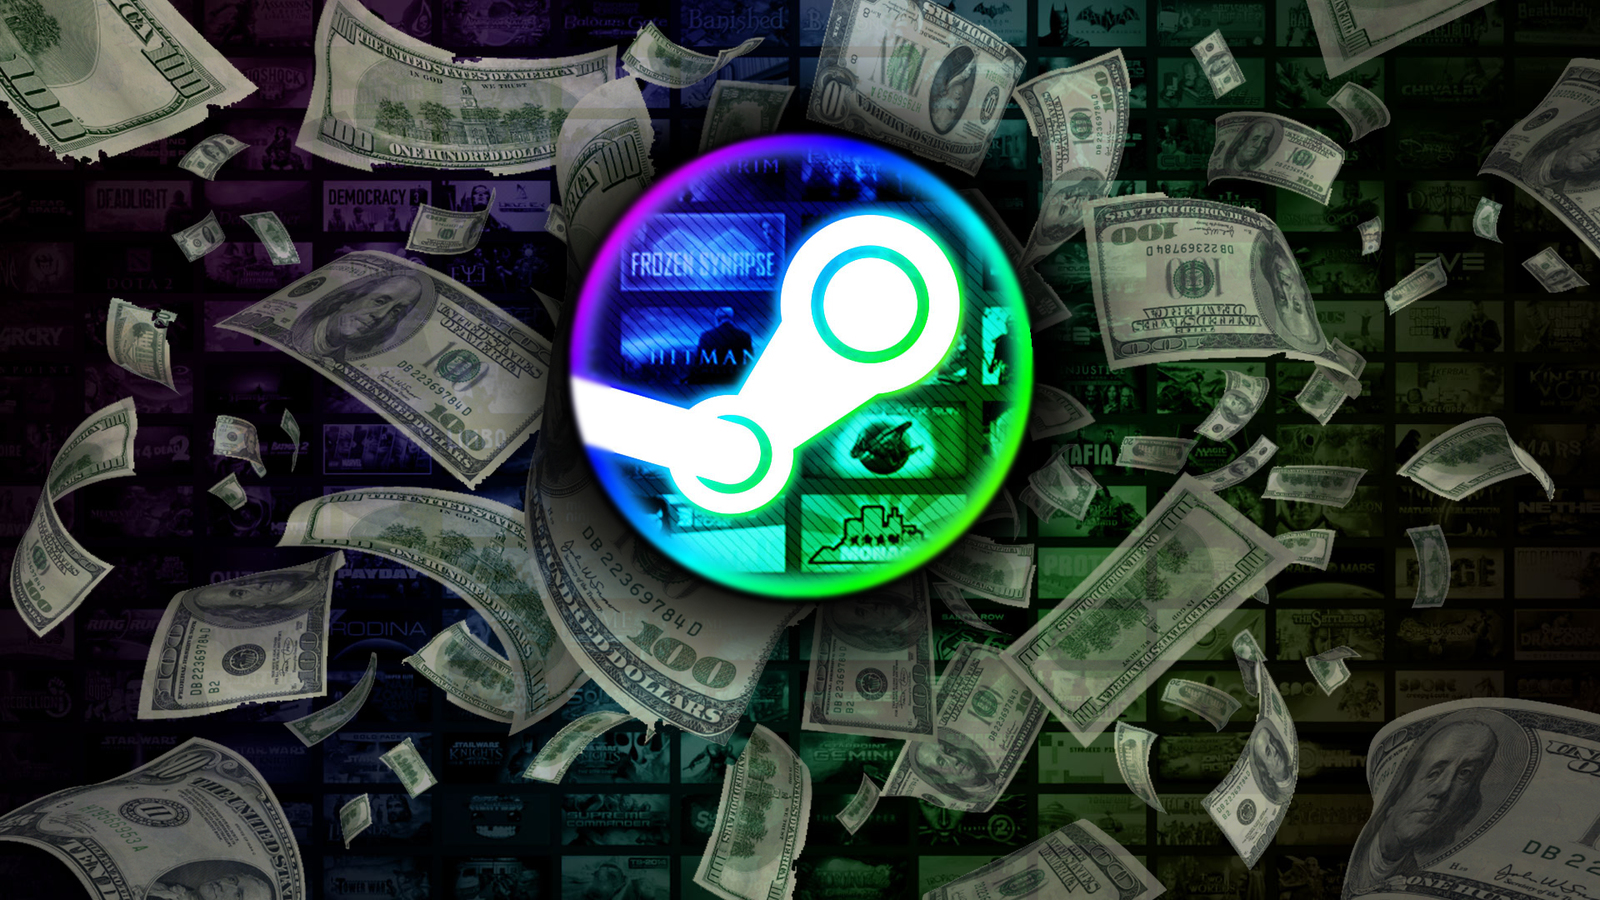 Steam trading items for money фото 46